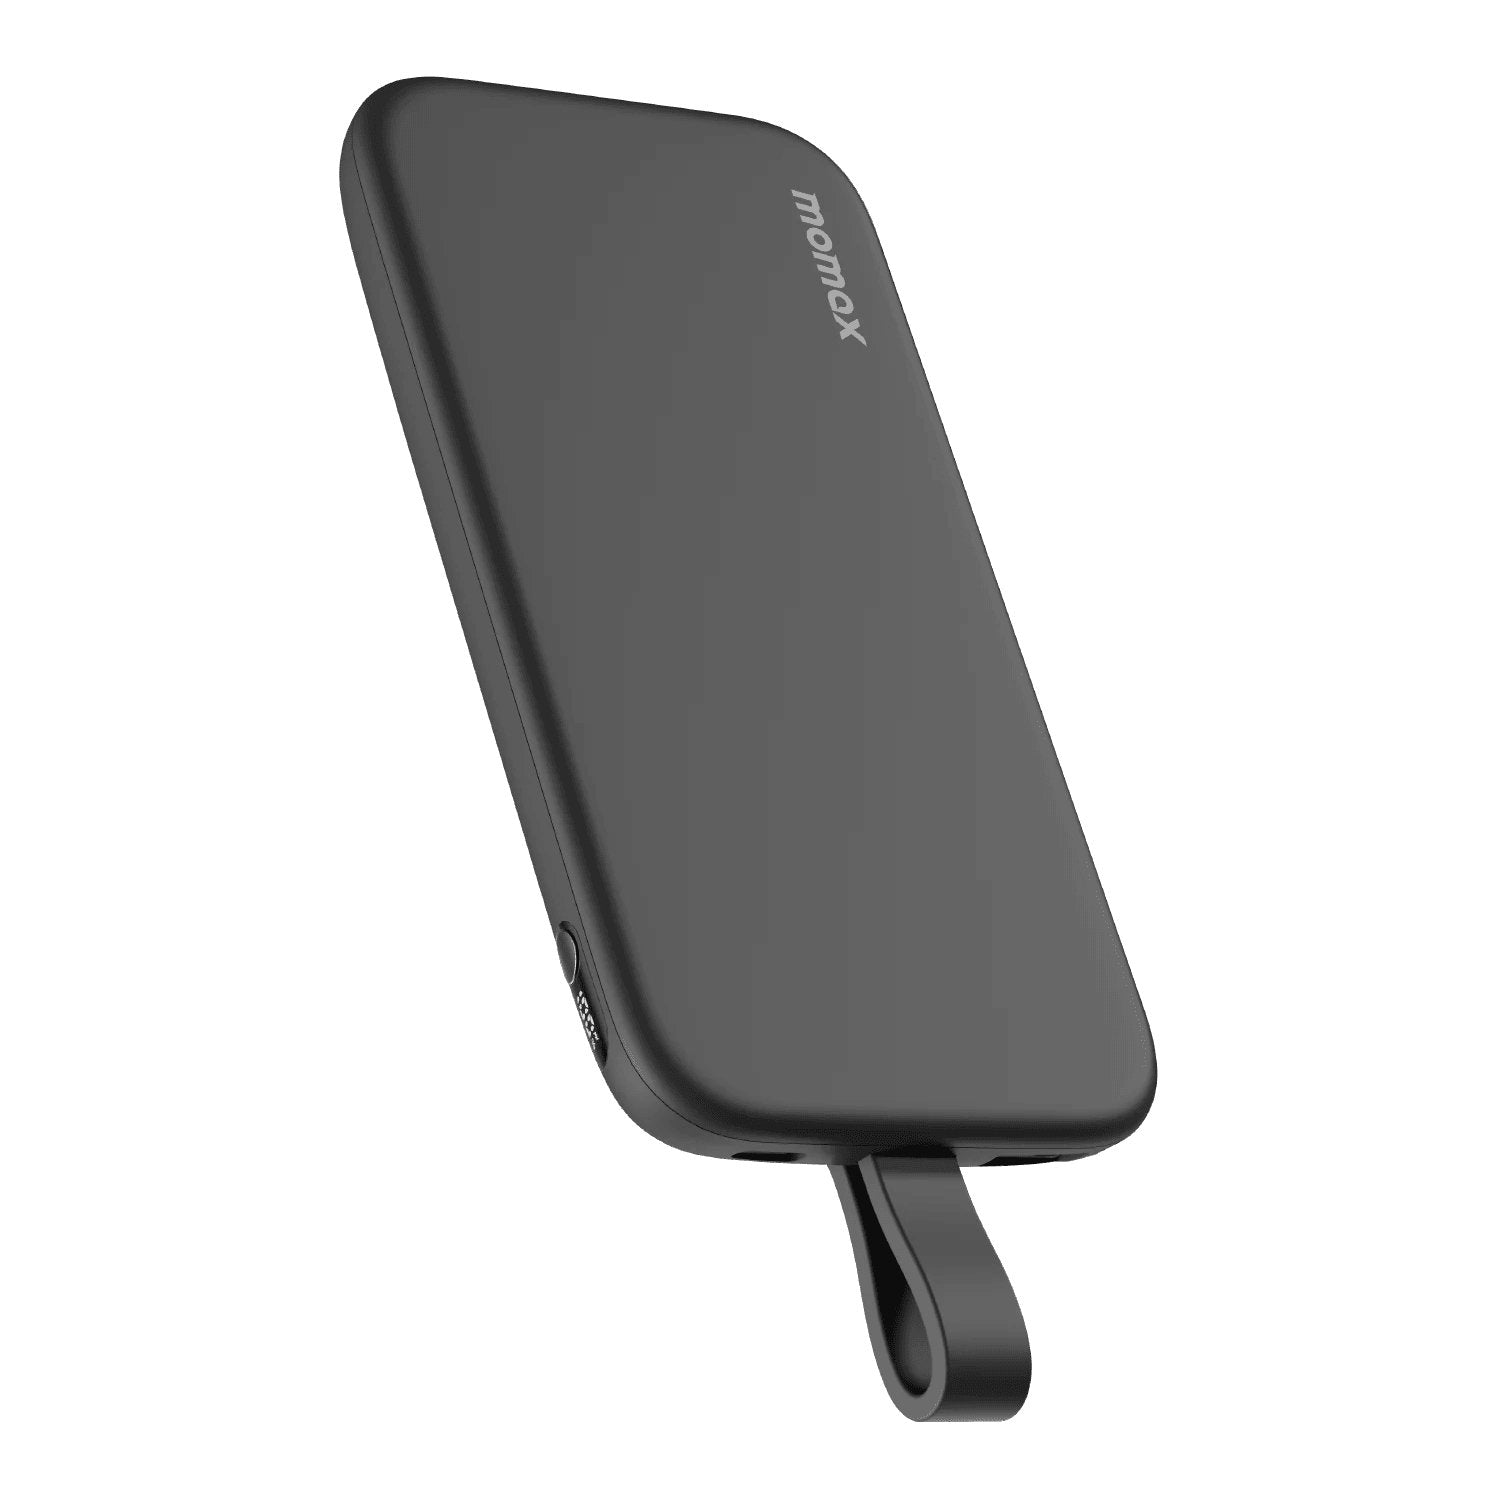 Momax iPower PD 3 10000mAh Built-in USB-C Power Bank - XPRS